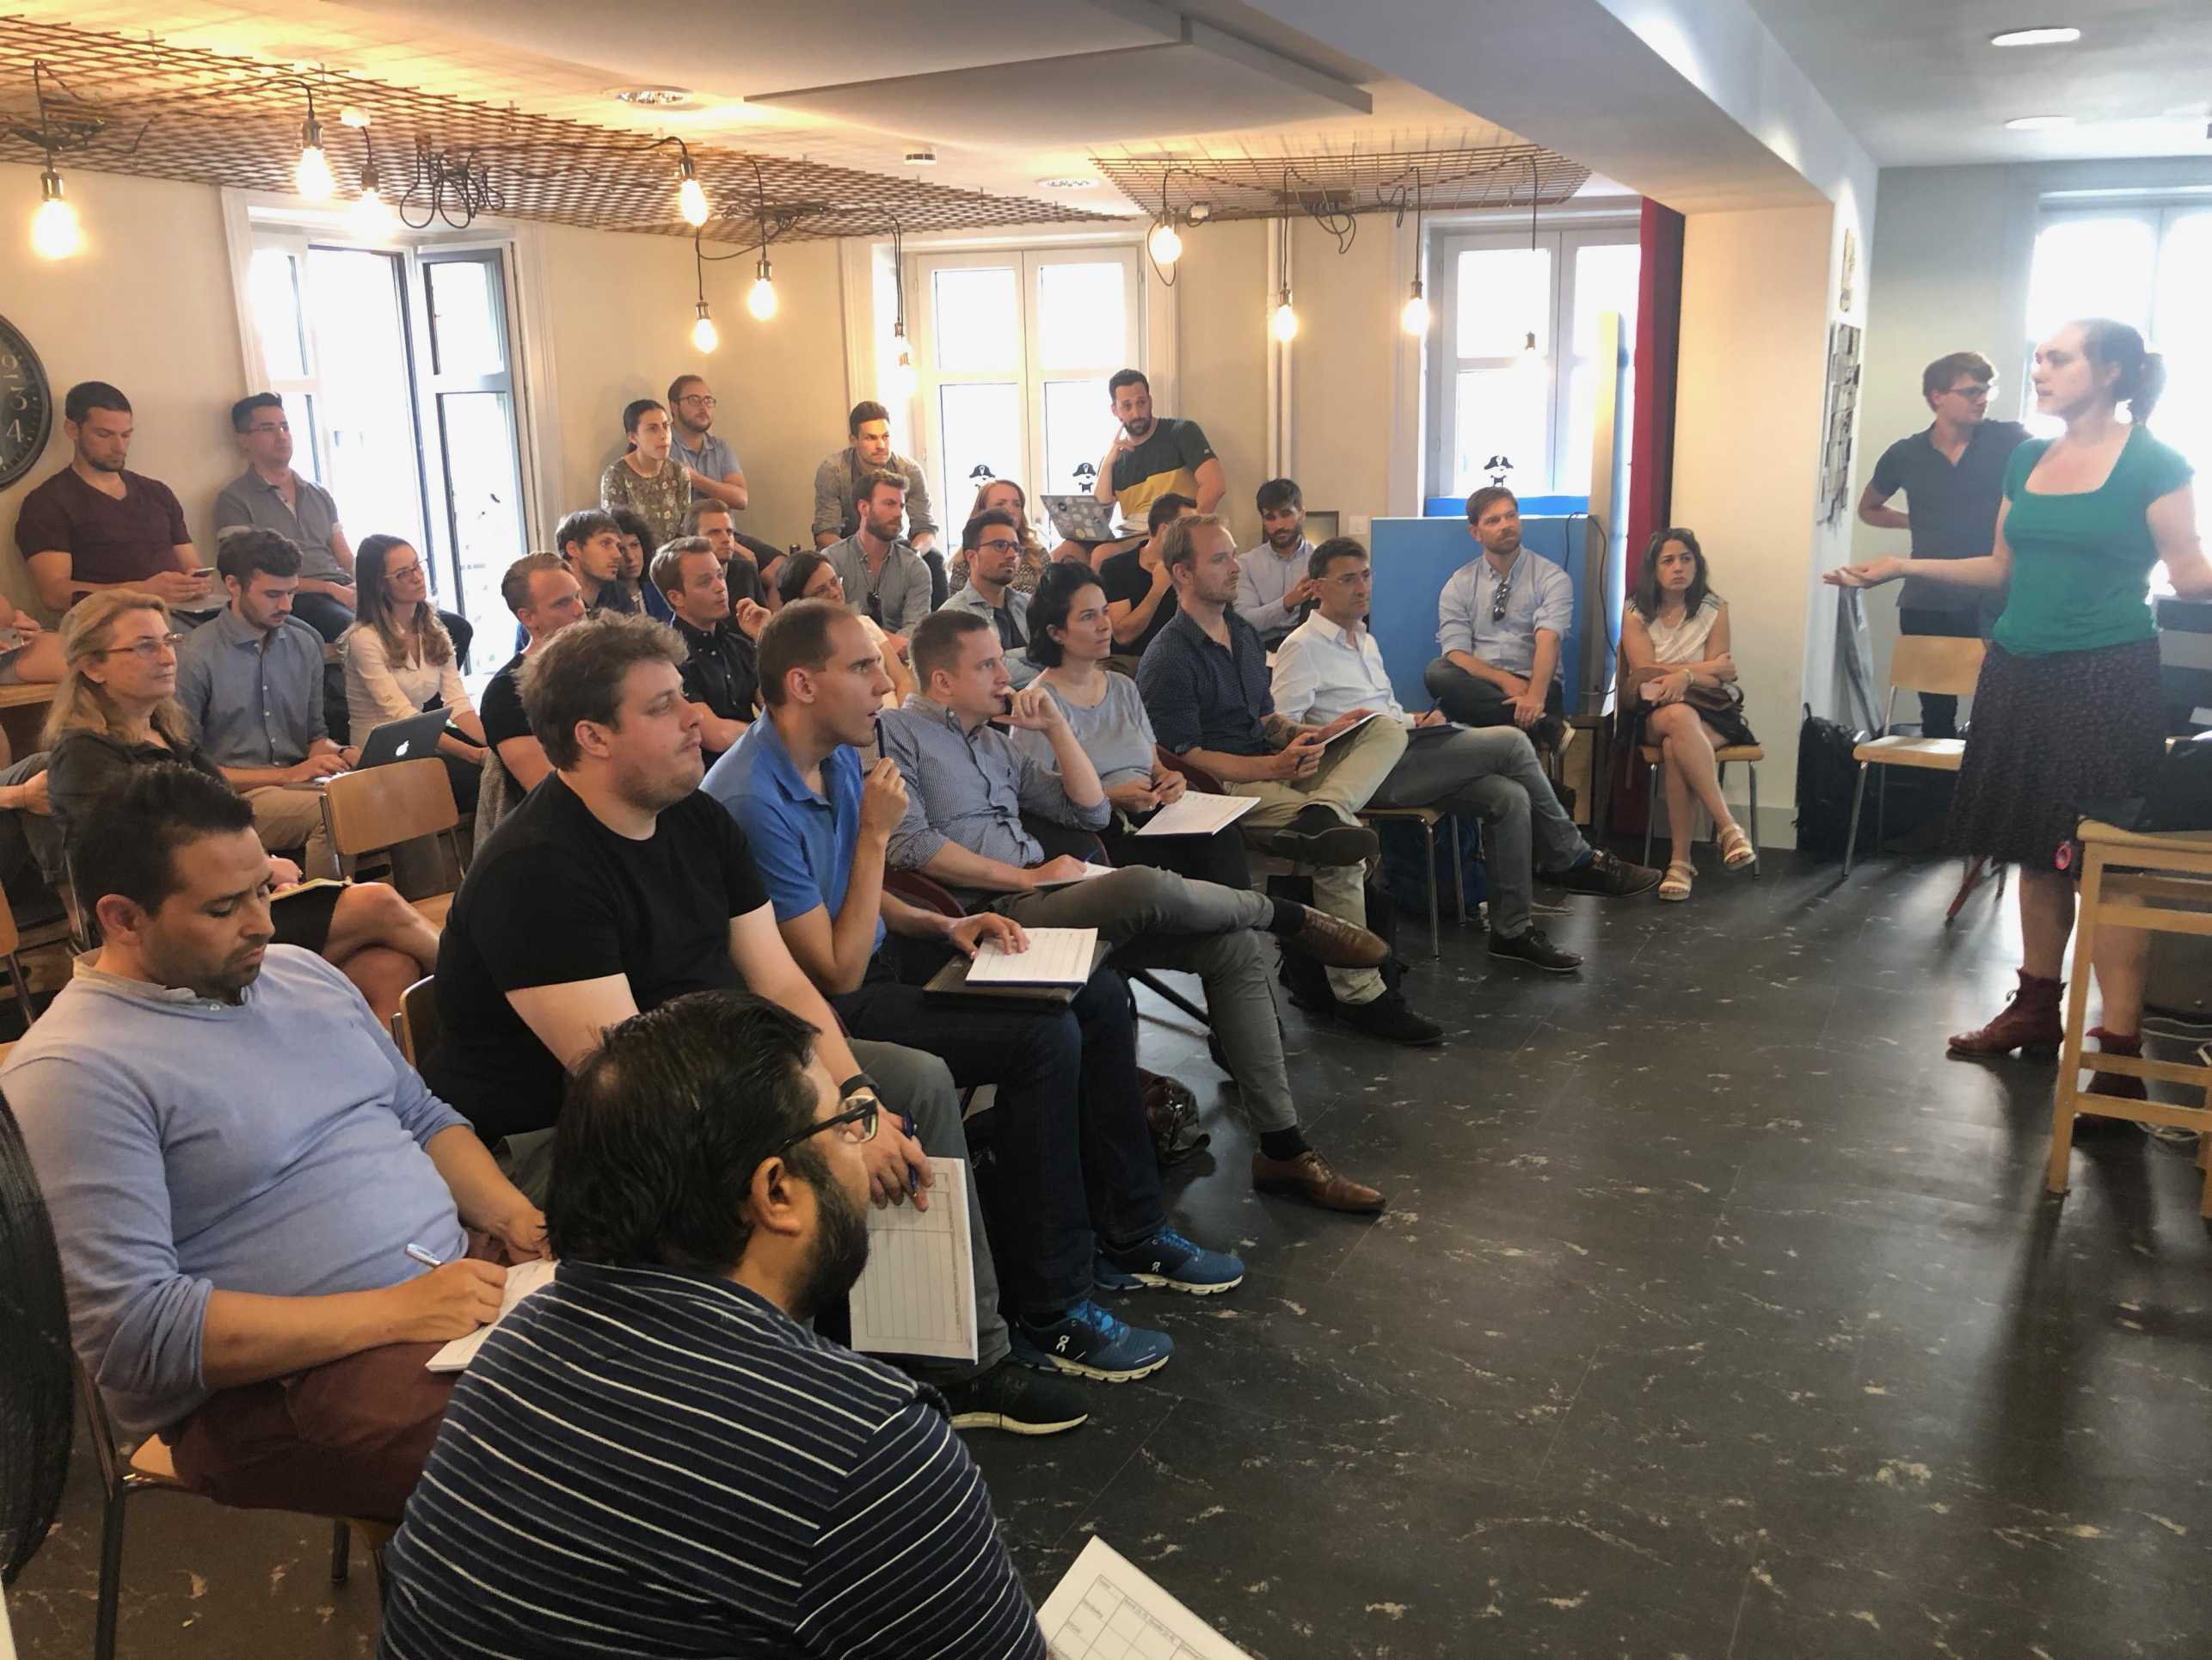 Enlarged view: 31 May 2018 - Jury of different experts from the Zurich startup ecosystem